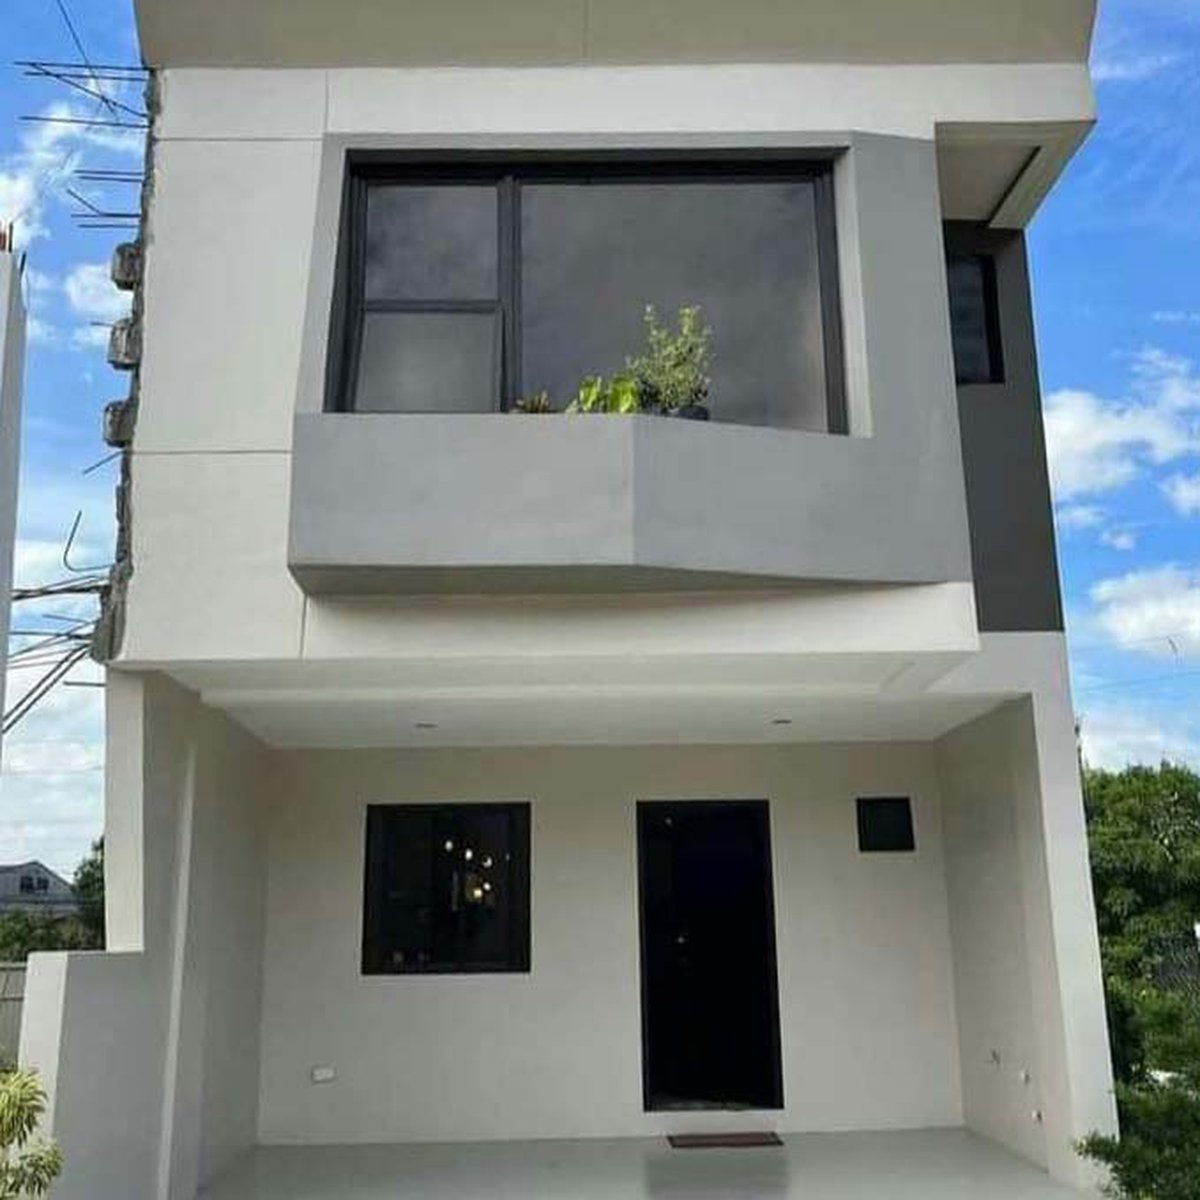 3-bedroom Townhouse For Sale in Antipolo Rizal